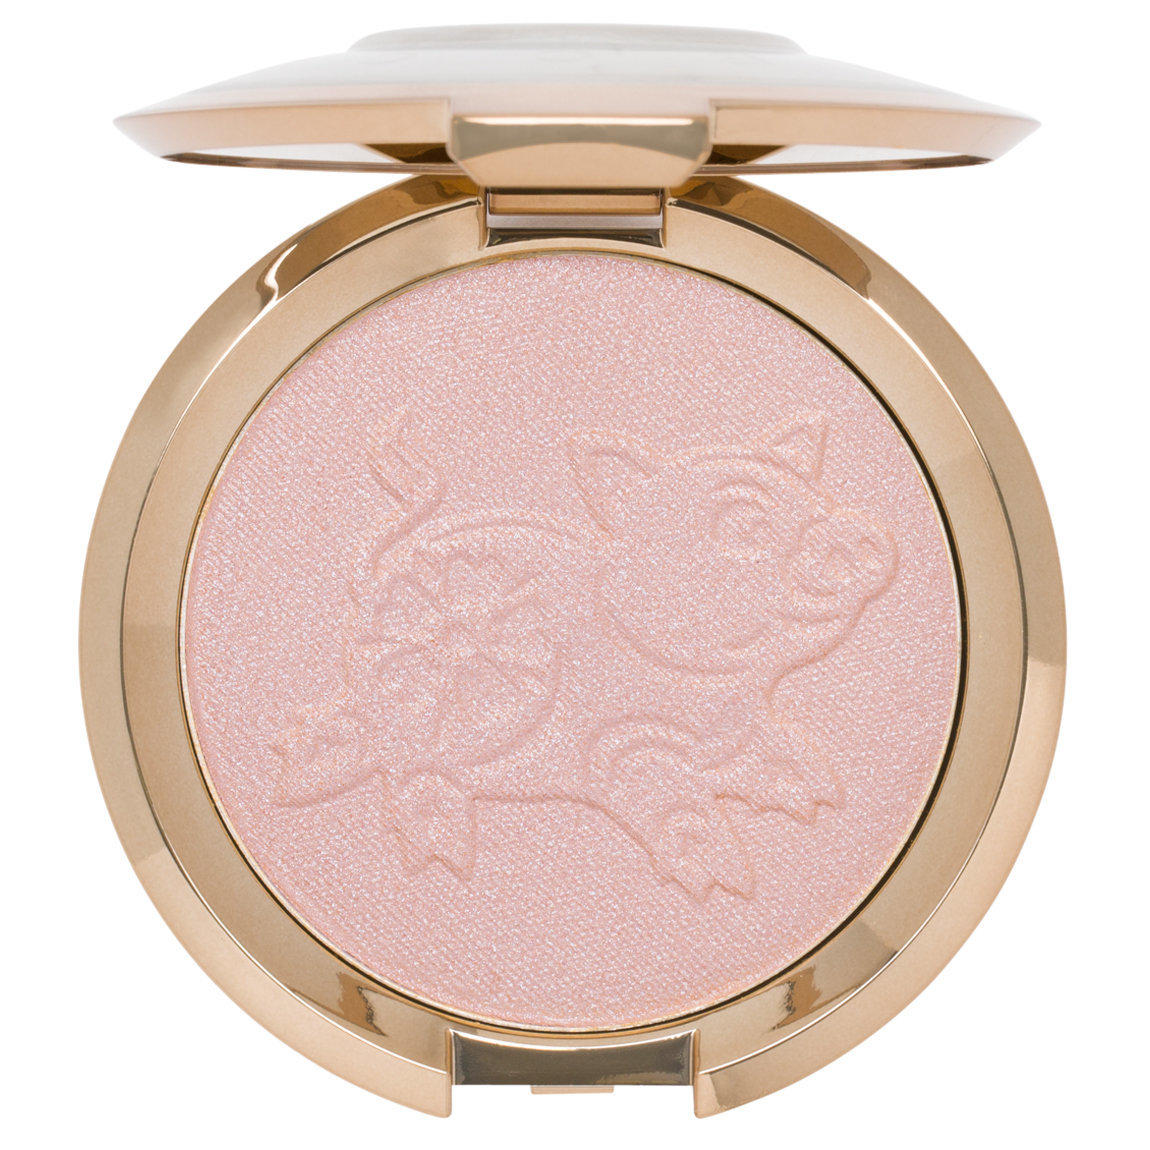 BECCA Shimmering Skin Perfector Year Of The Pig